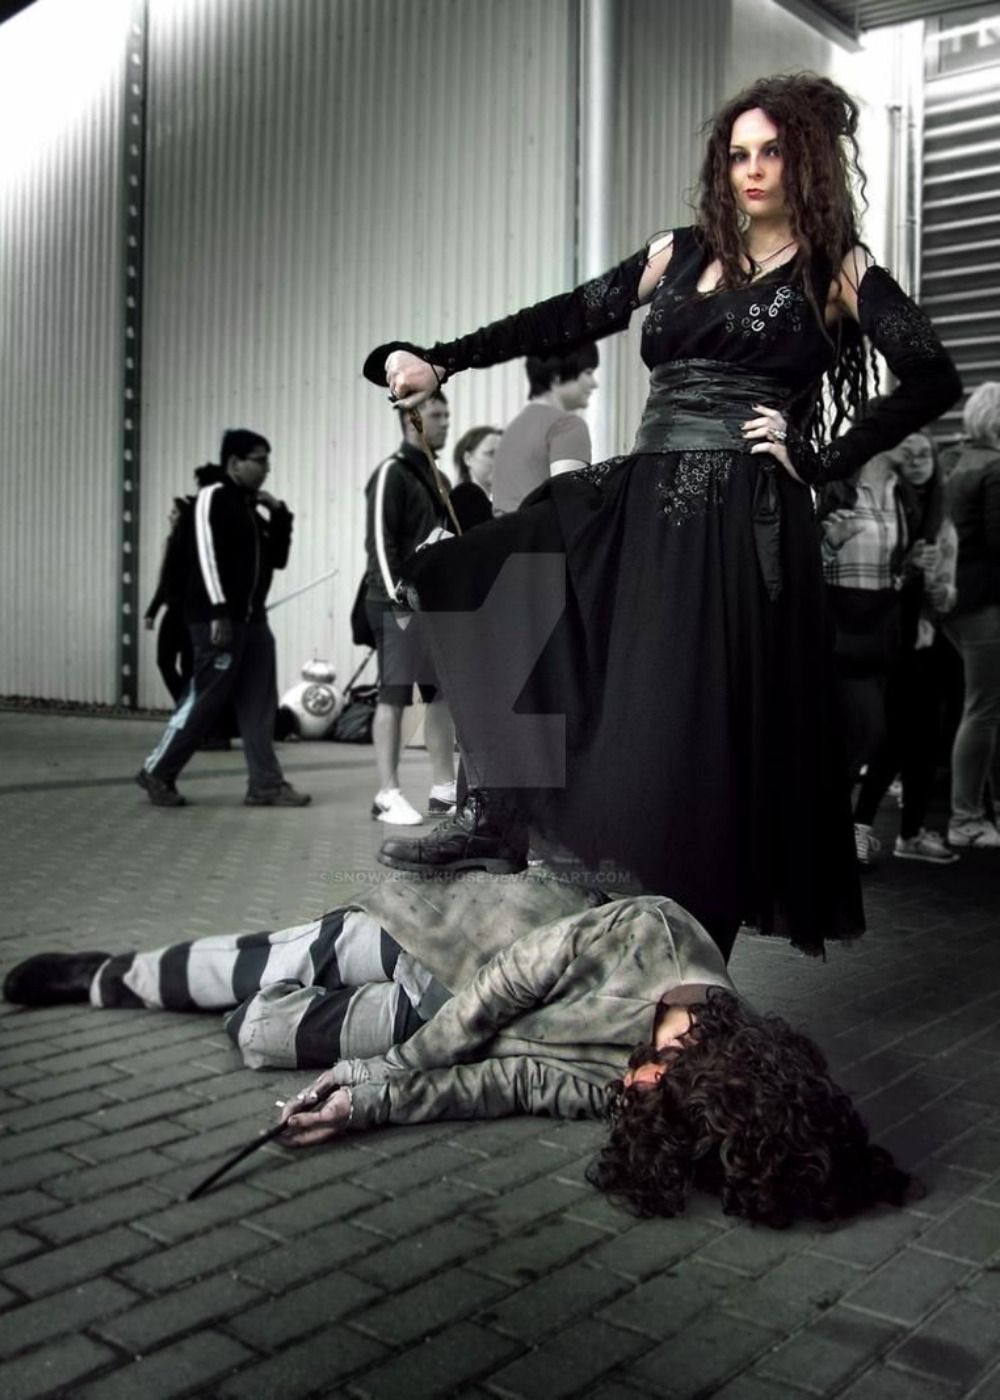 Harry Potter 10 Bellatrix Lestrange Cosplays That Will Give You The Chills